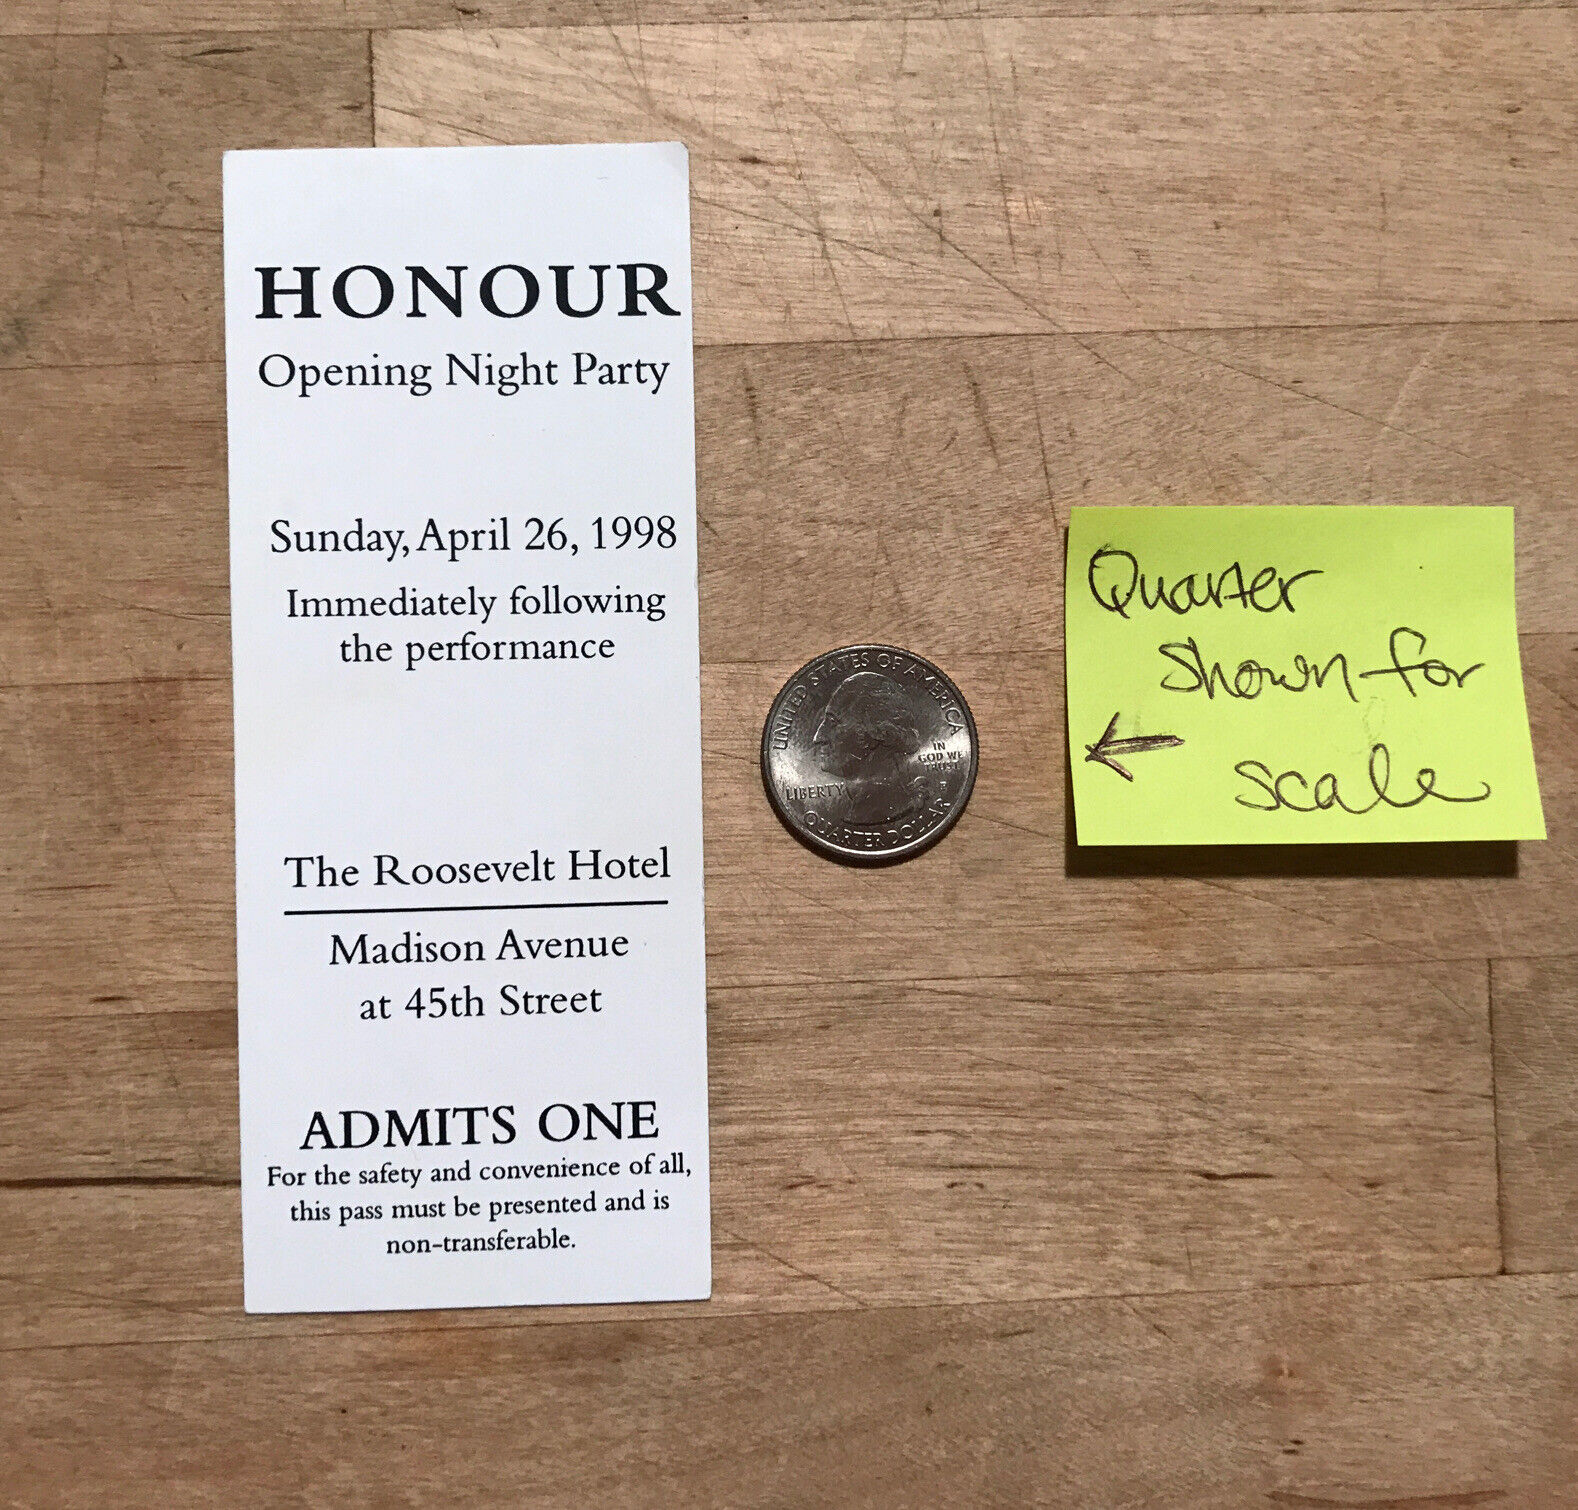 Honour Bway April 1998 Broadway Opening Night Party Pass! Rare Musical Play Bway